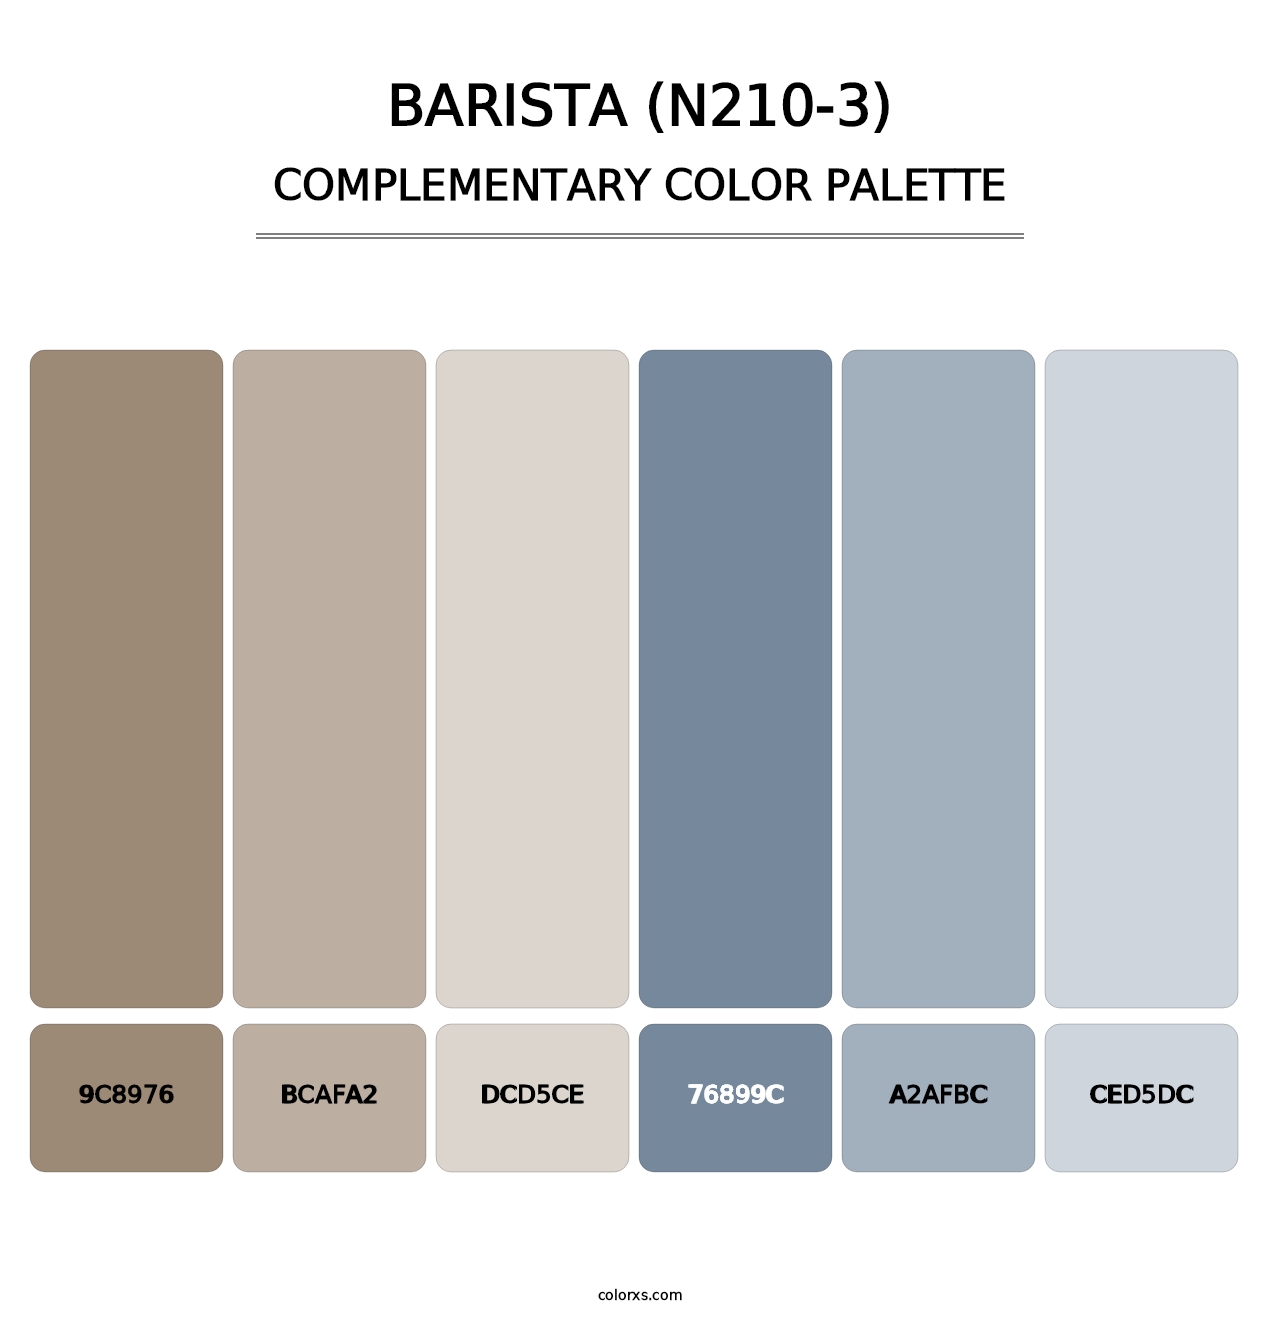 Barista (N210-3) - Complementary Color Palette